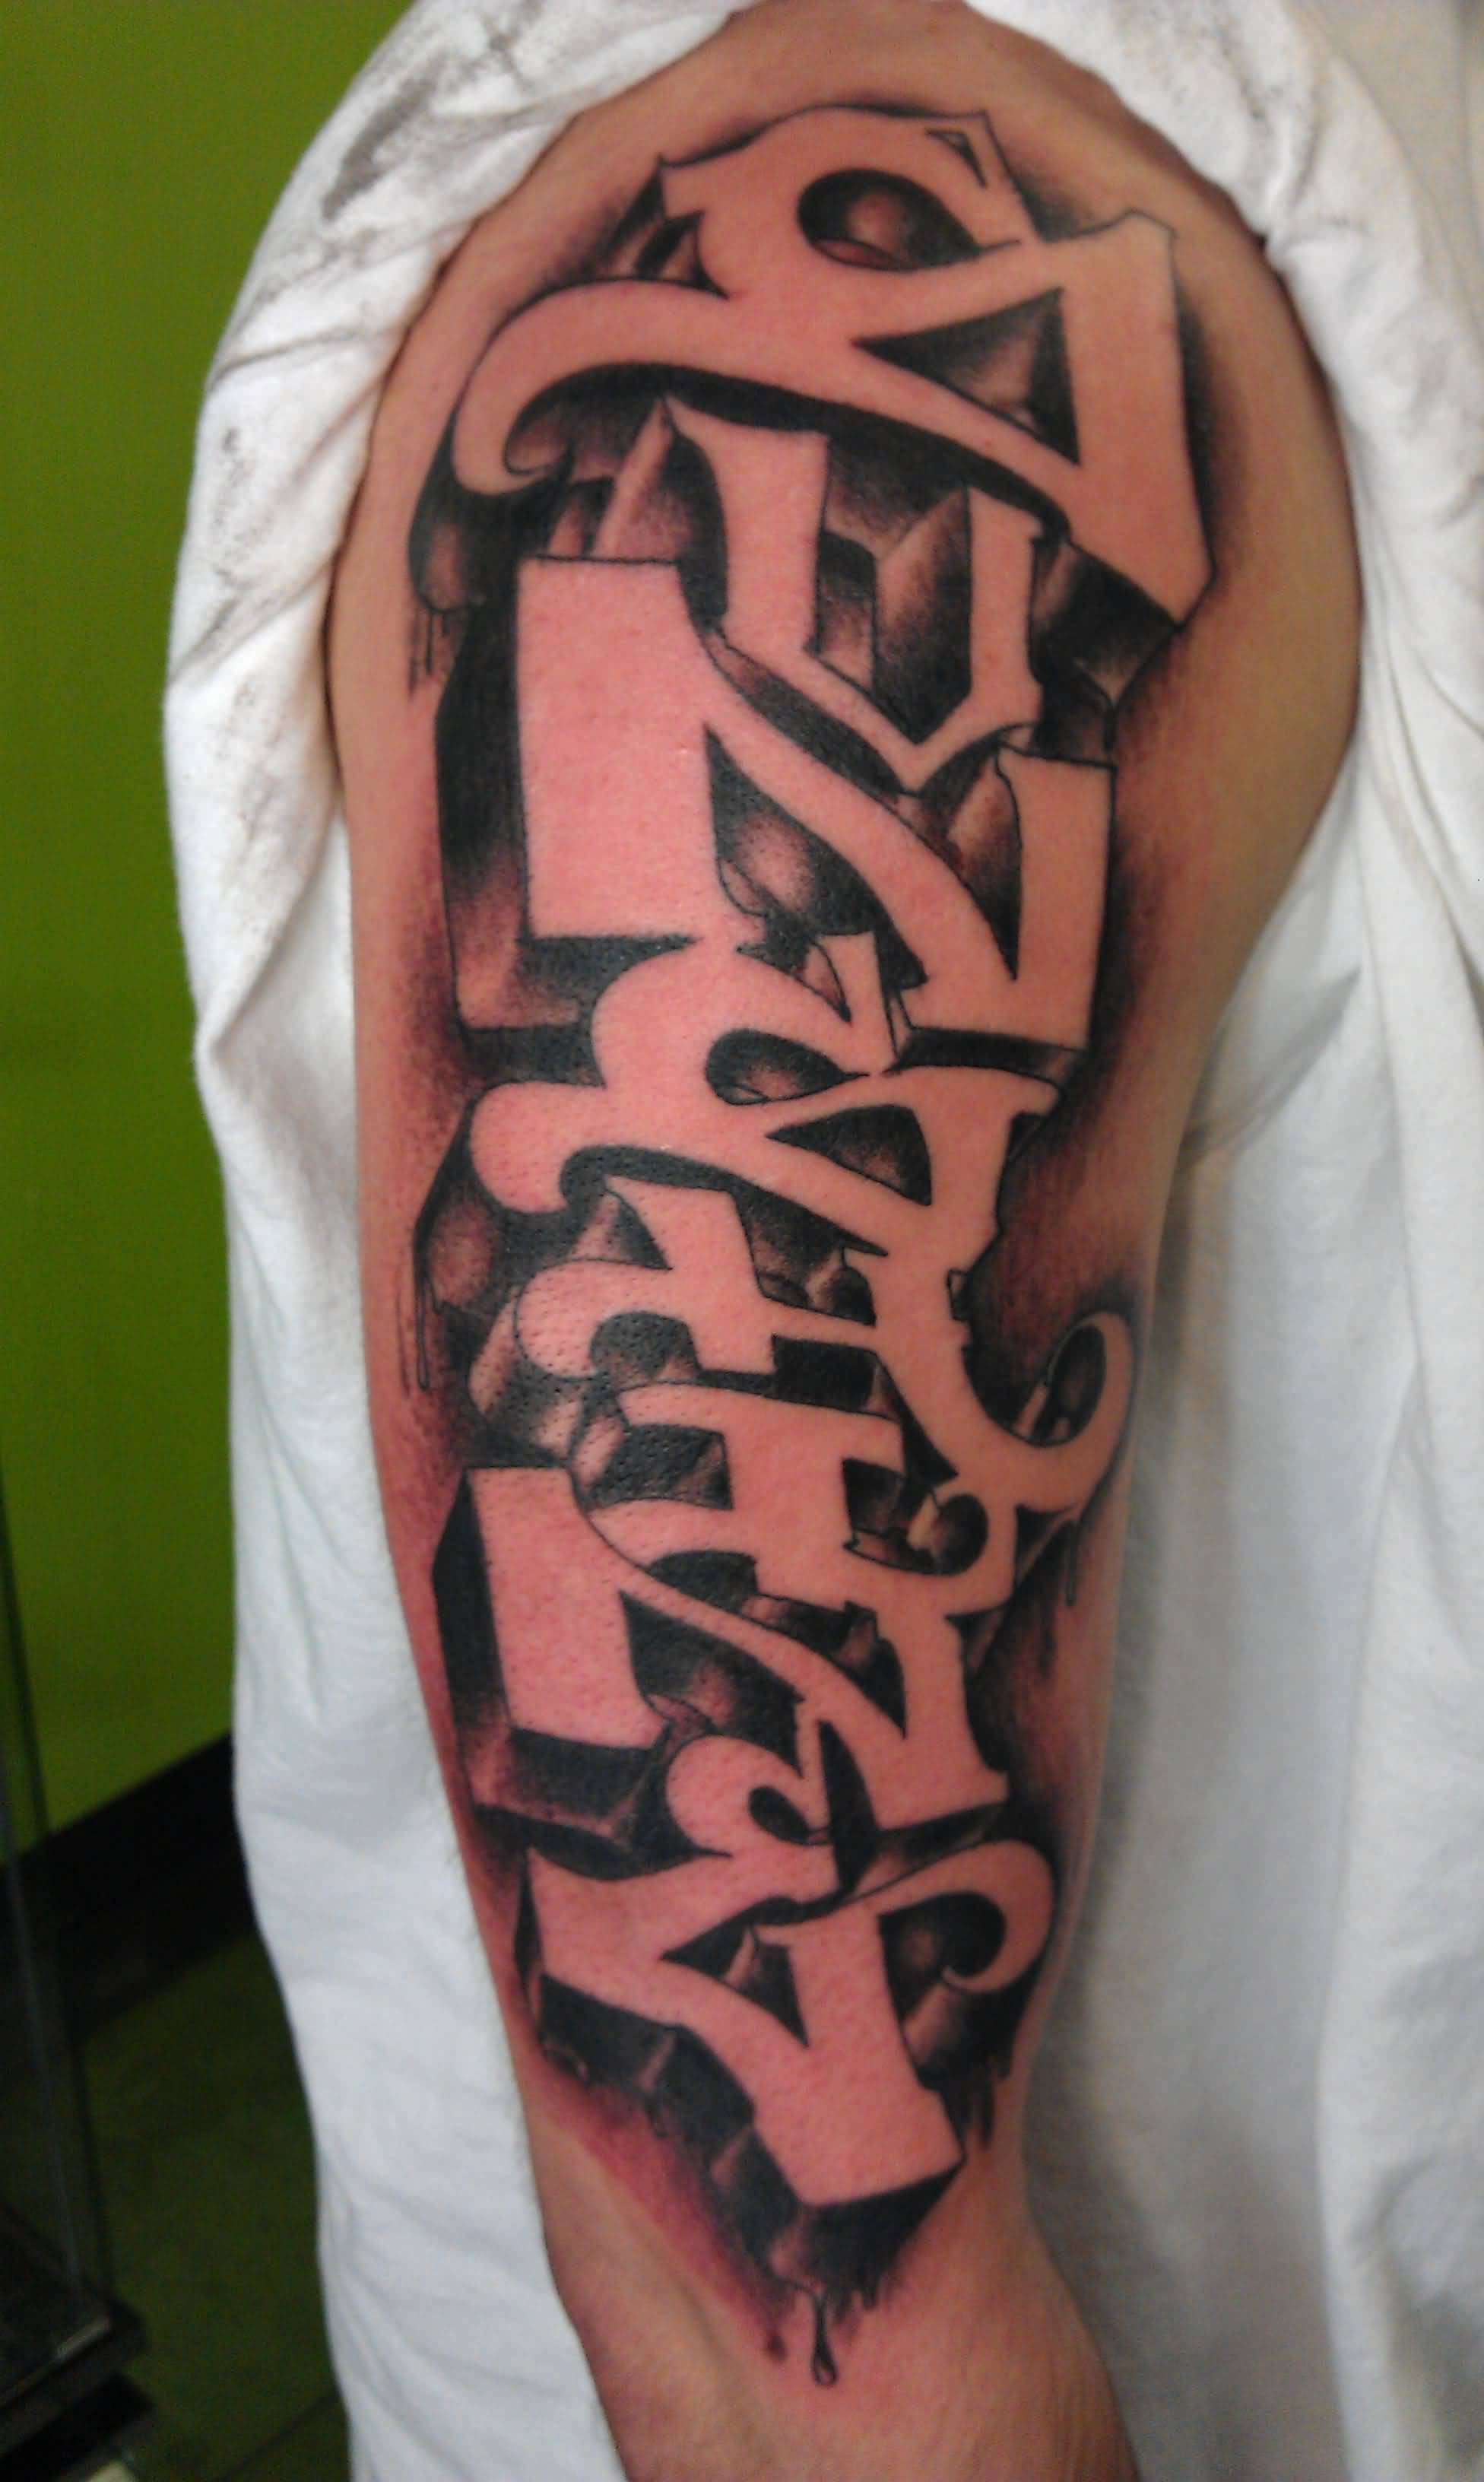 30 Graffiti Tattoo Images Pictures And Designs Ideas pertaining to dimensions 1952 X 3264